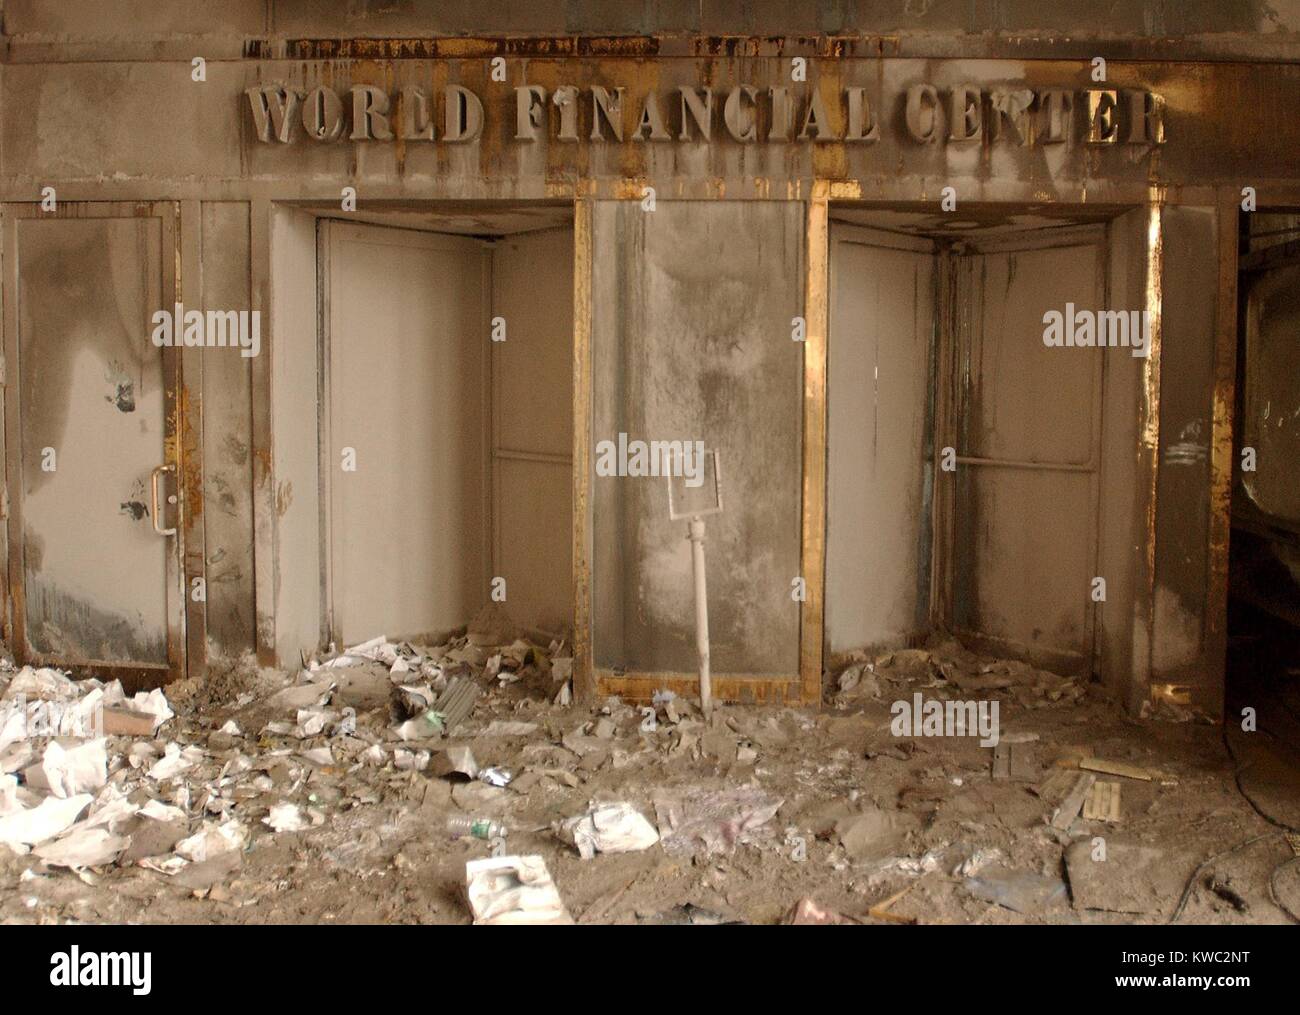 World Financial Center doorway blanketed in ash and soot after the collapse of the Twin Towers. Sept. 14, 2001. New York City, after September 11, 2001 terrorist attacks. U.S. Navy Photo by Jim Watson (BSLOC 2015 2 78) Stock Photo